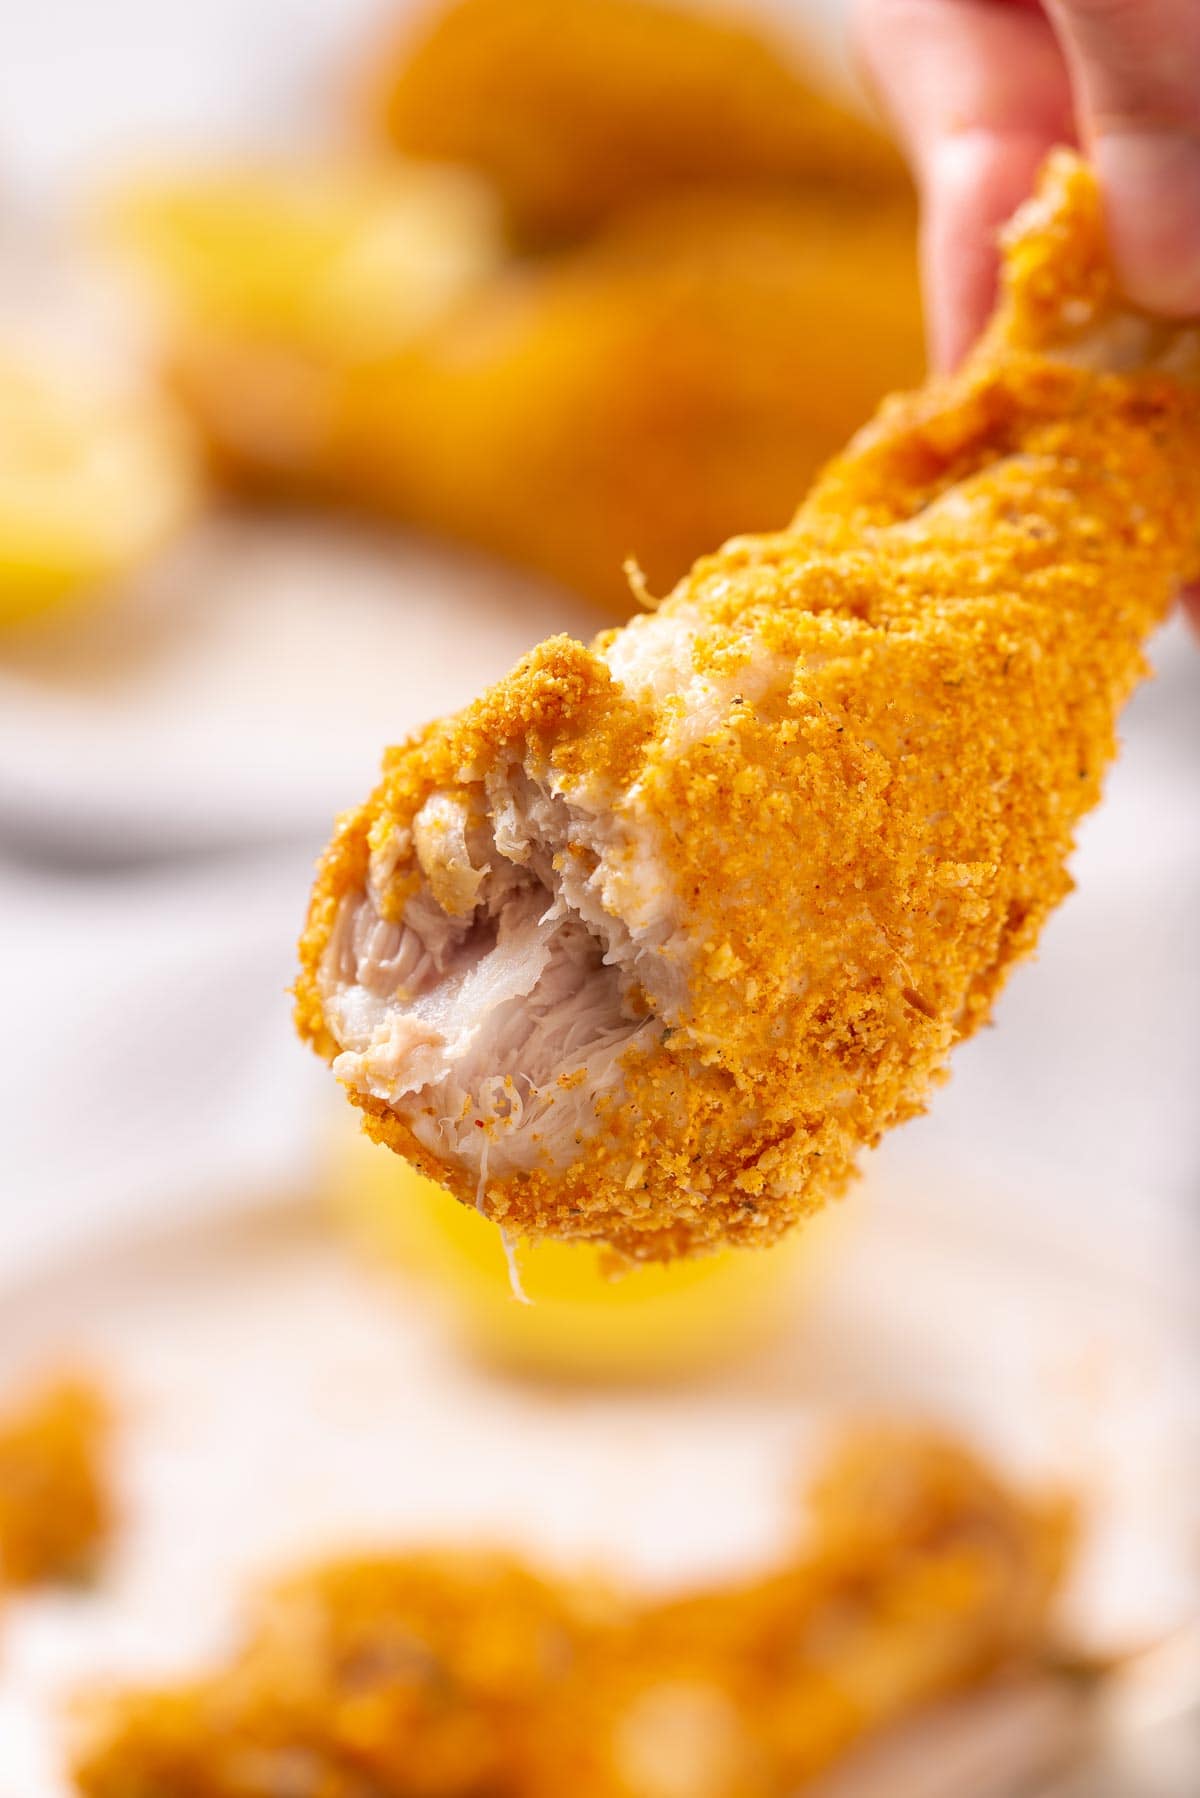 A chicken drumstick with a bite in it.